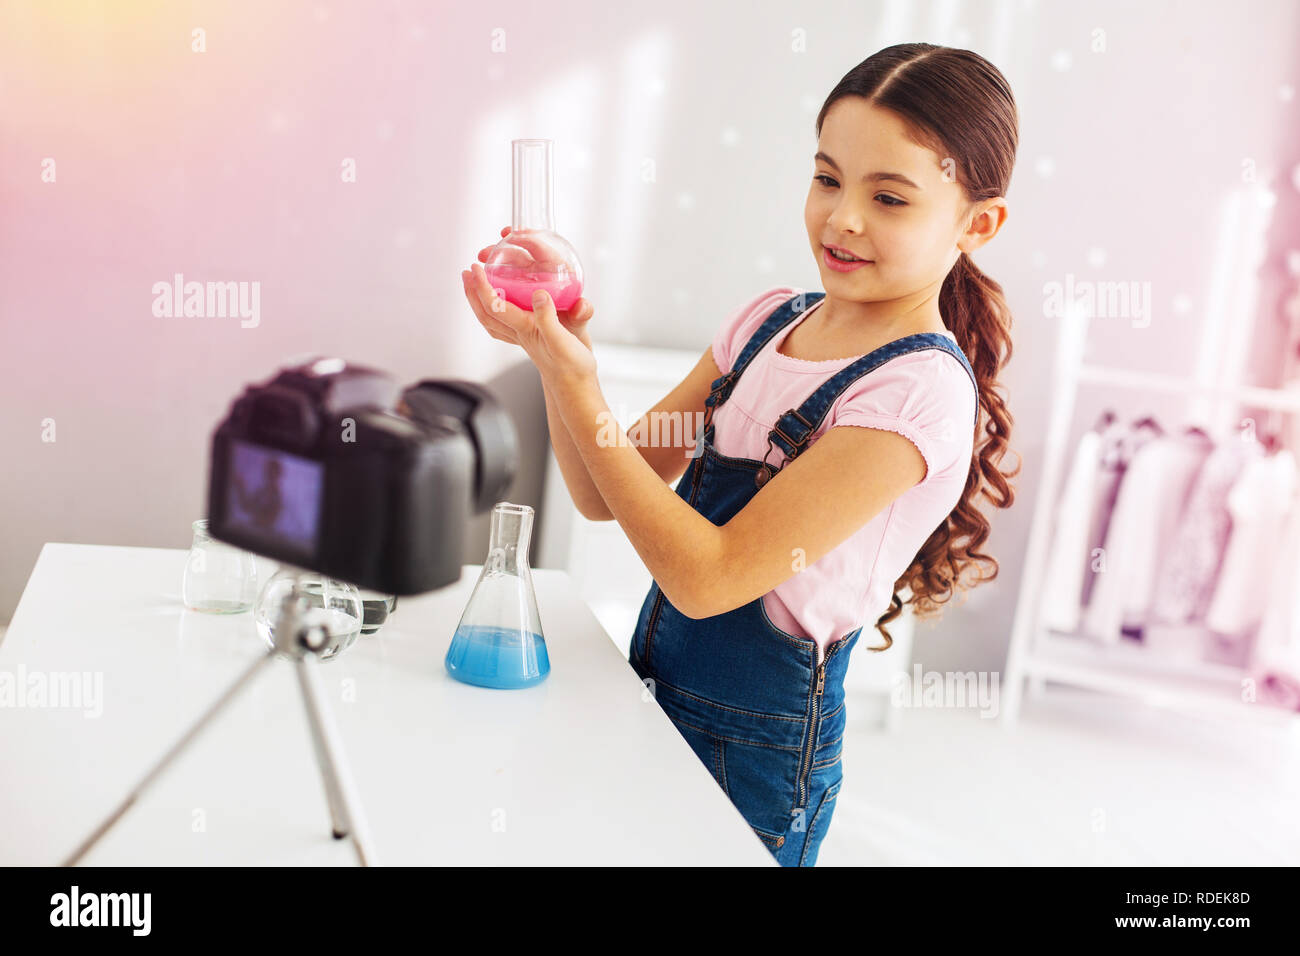 Preschool girl fond of chemistry greatly filming blog about her experiment Stock Photo